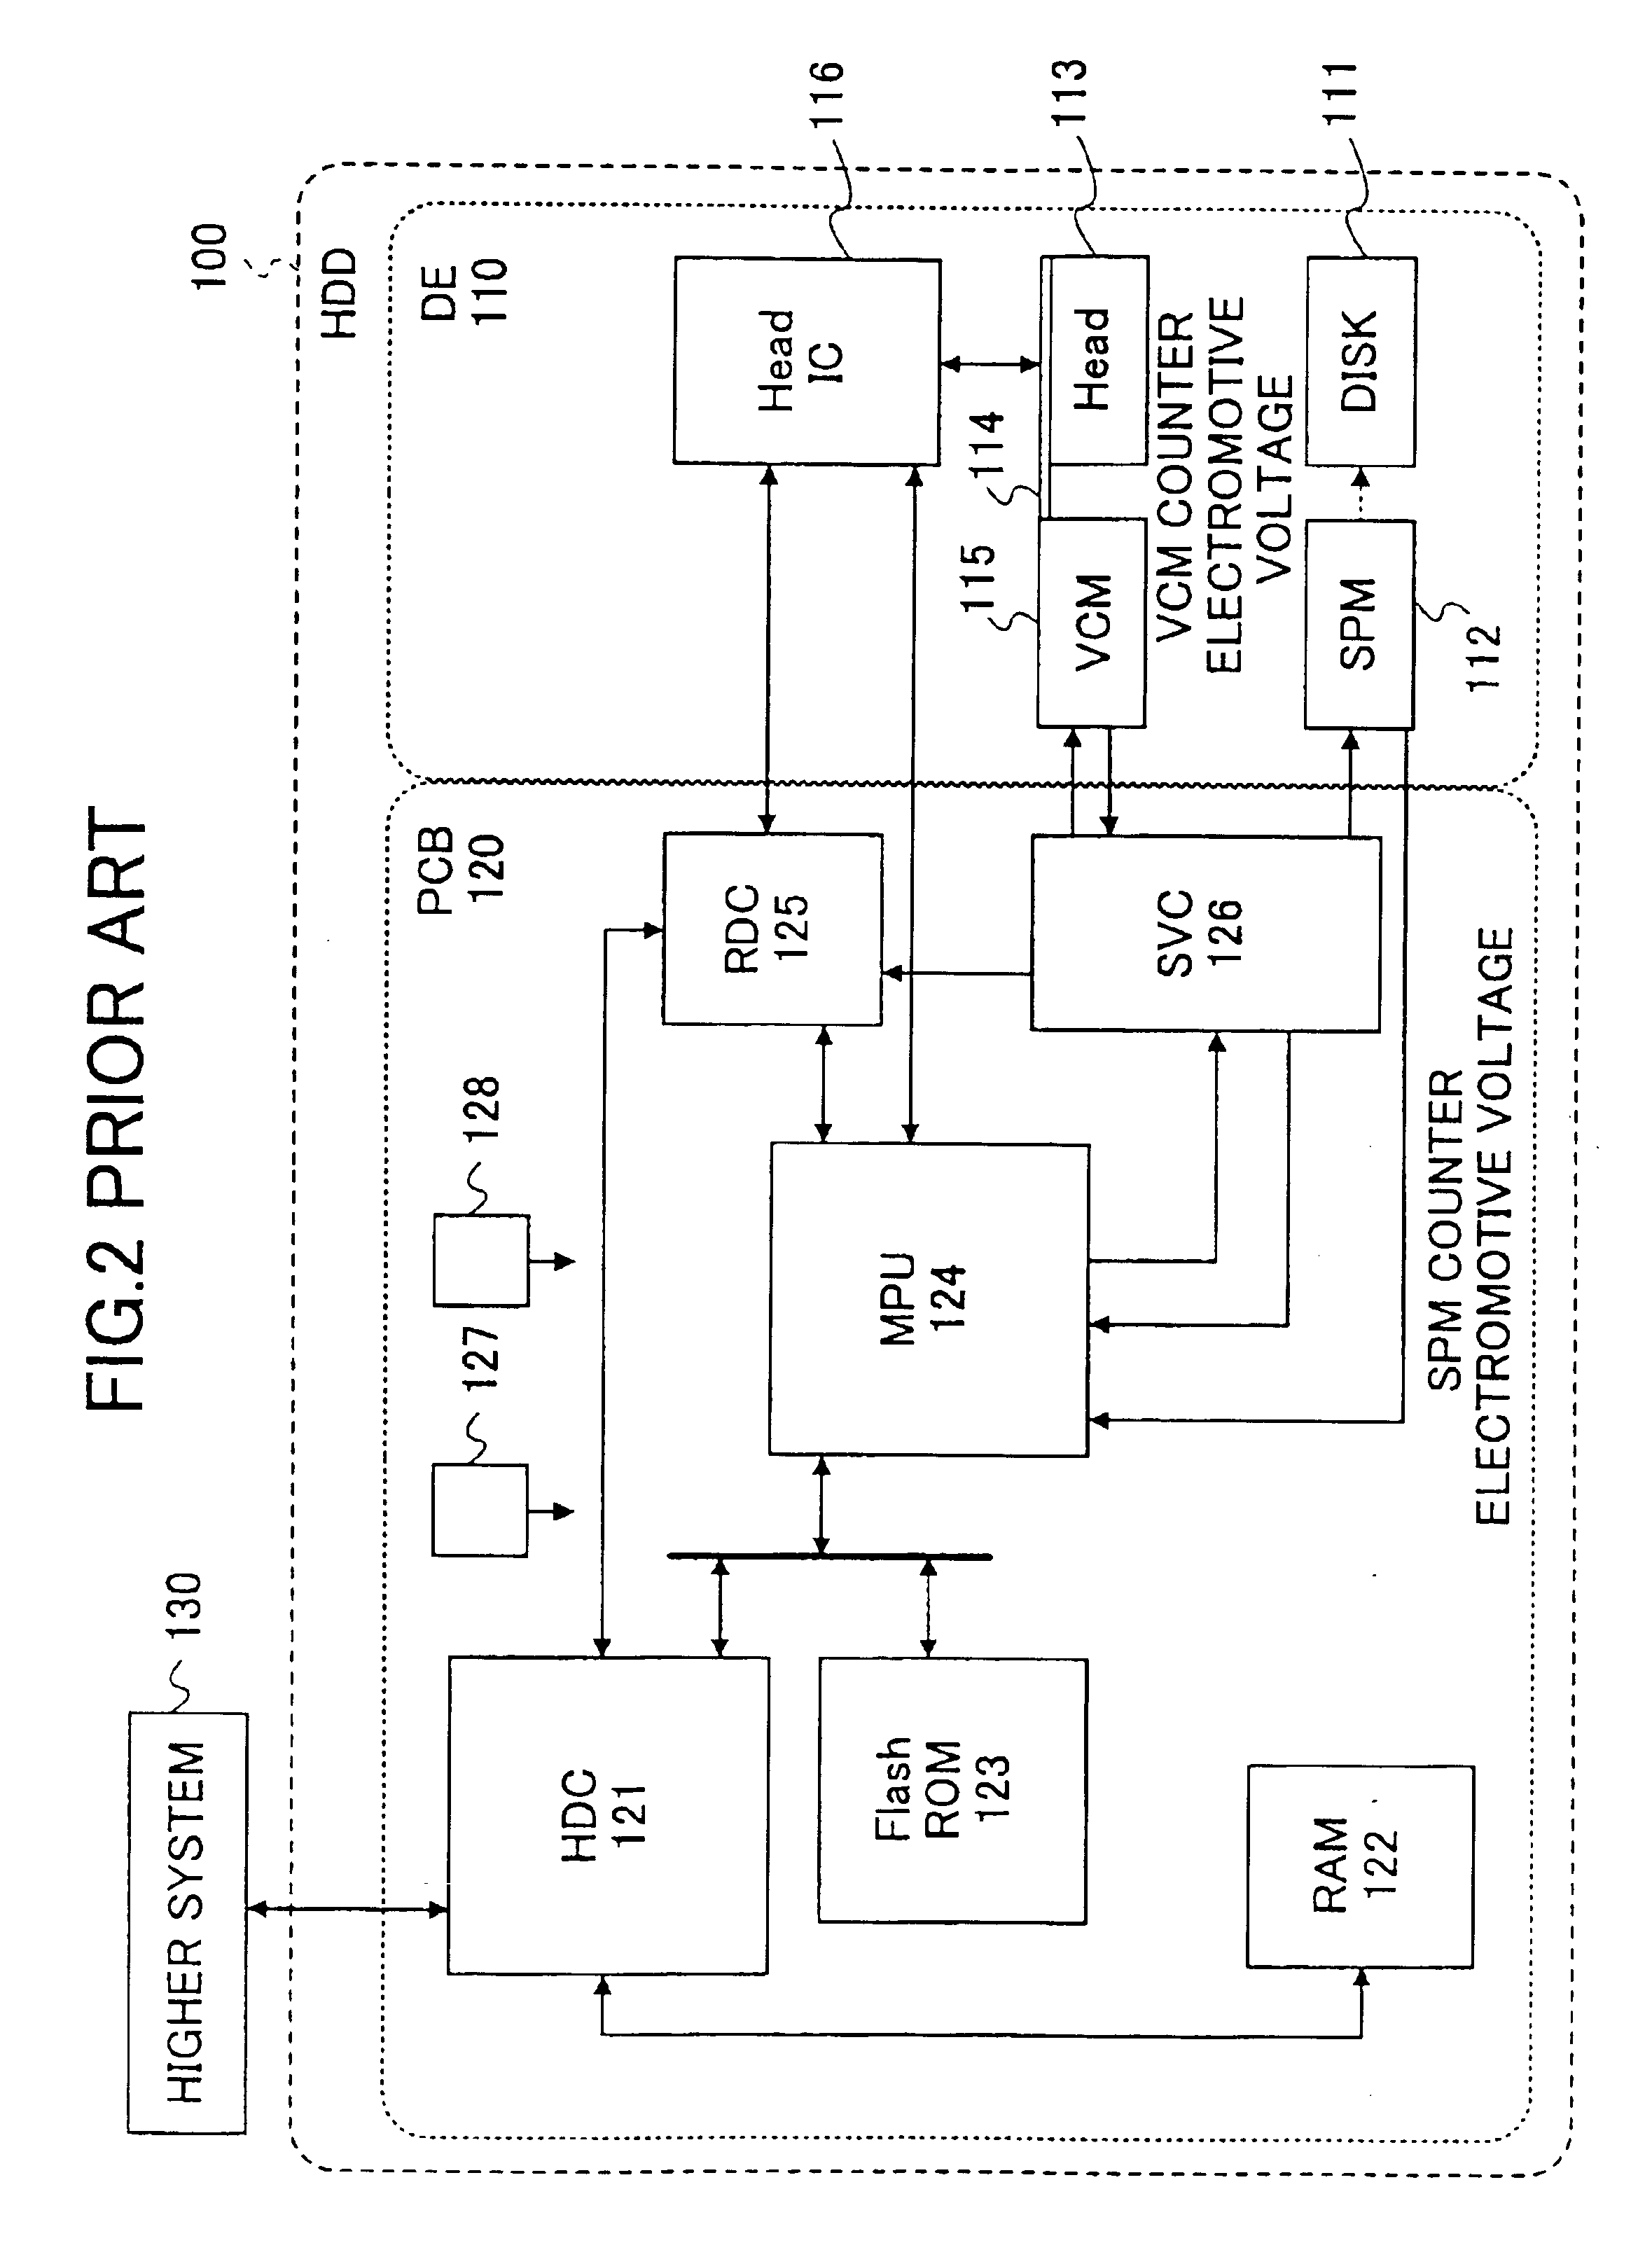 Disk device conducting a disturbance compensation based on a time-interval measurement in reading servo sectors recorded on a disk